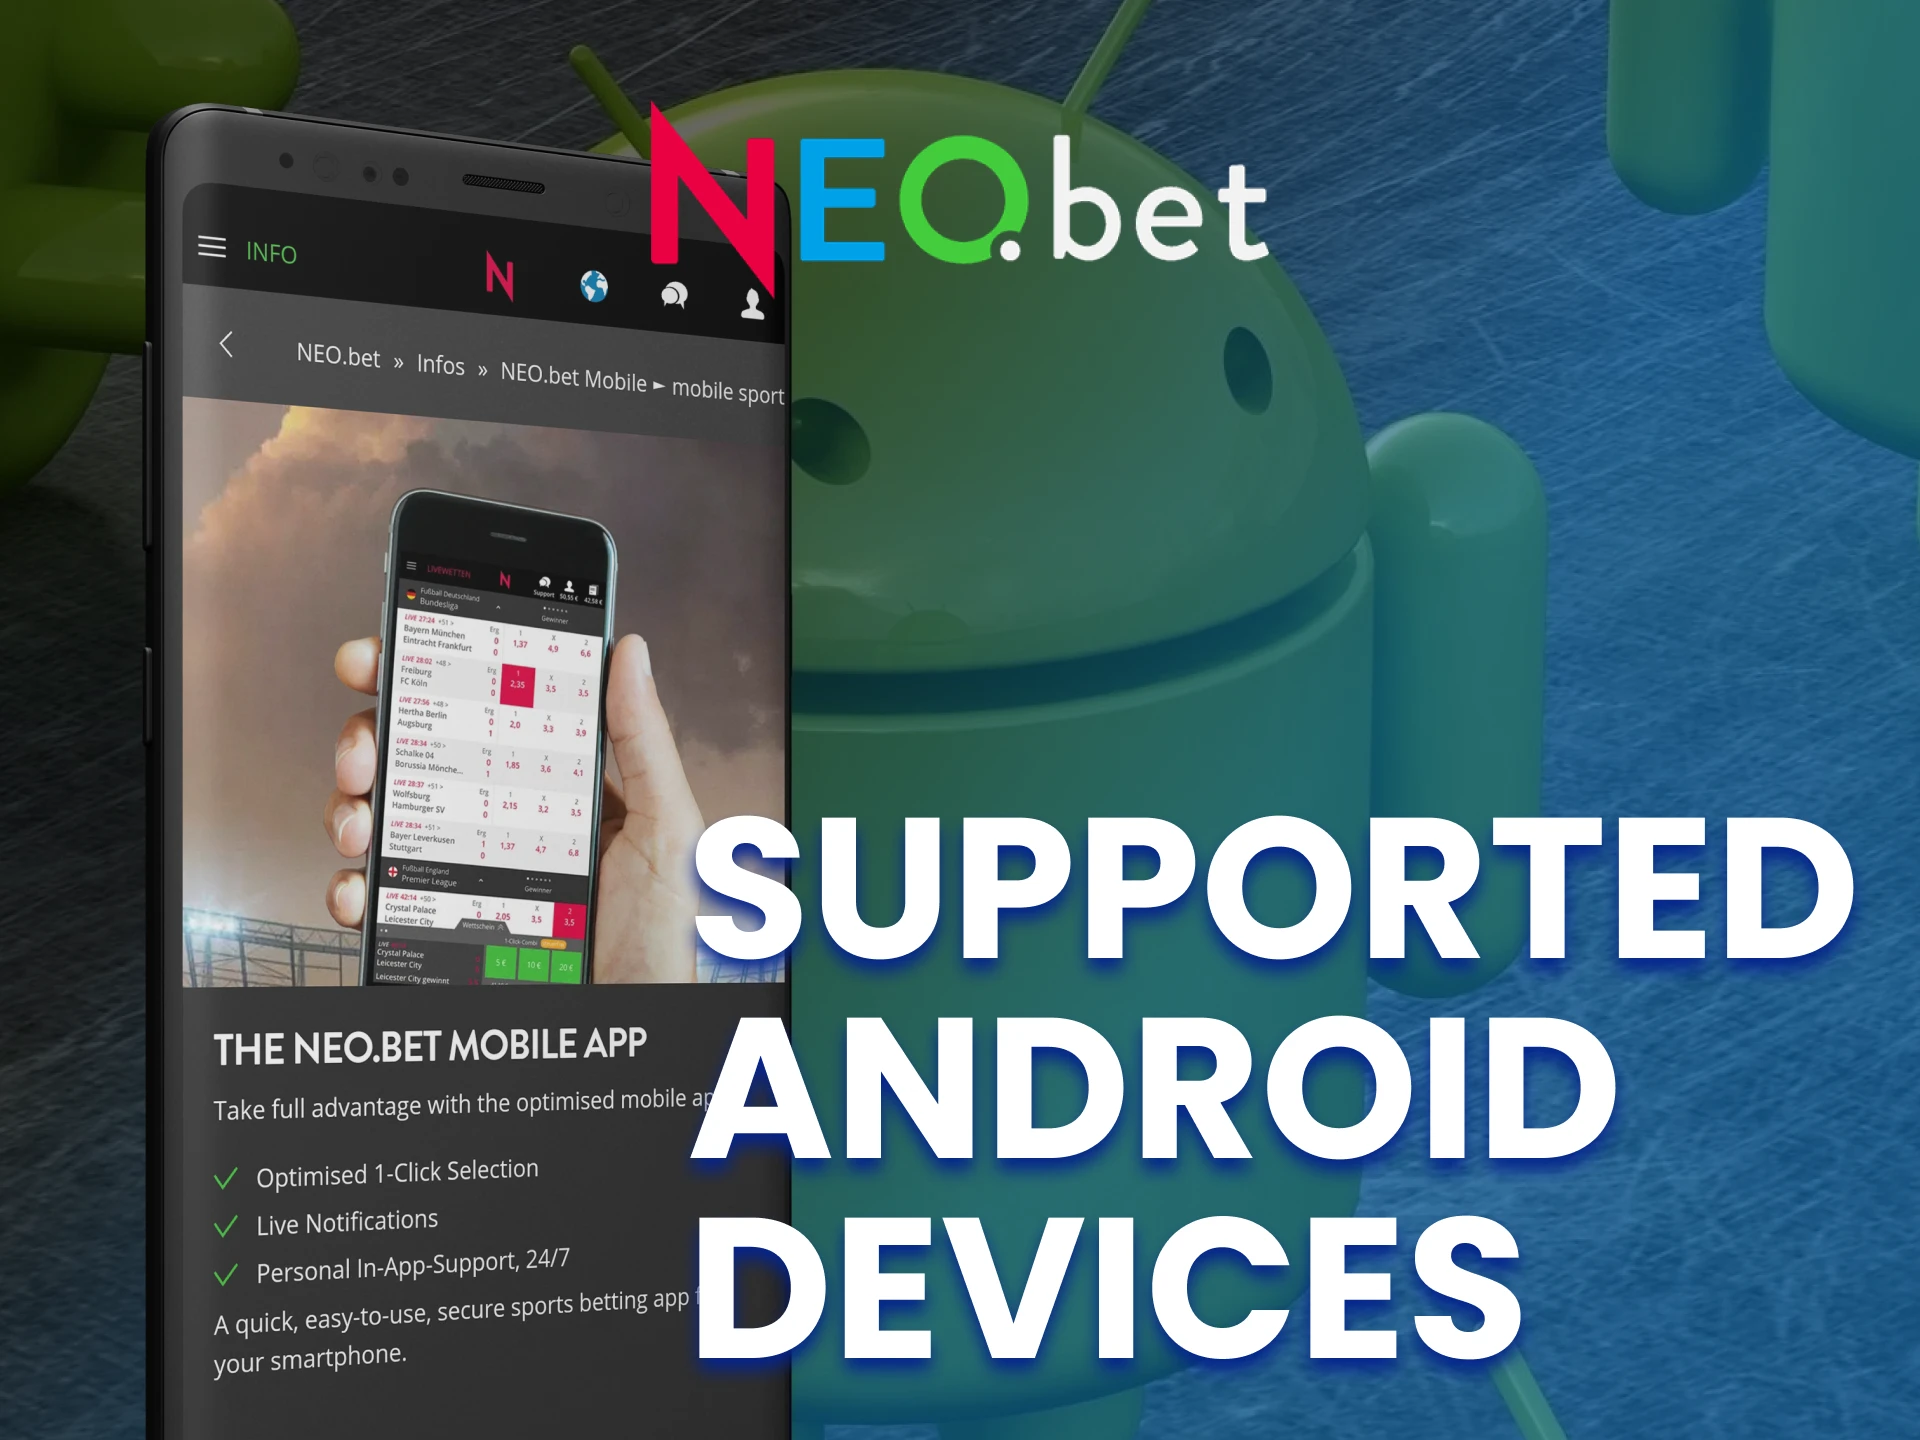 The NEO.bet app can be installed on a variety of Android devices.